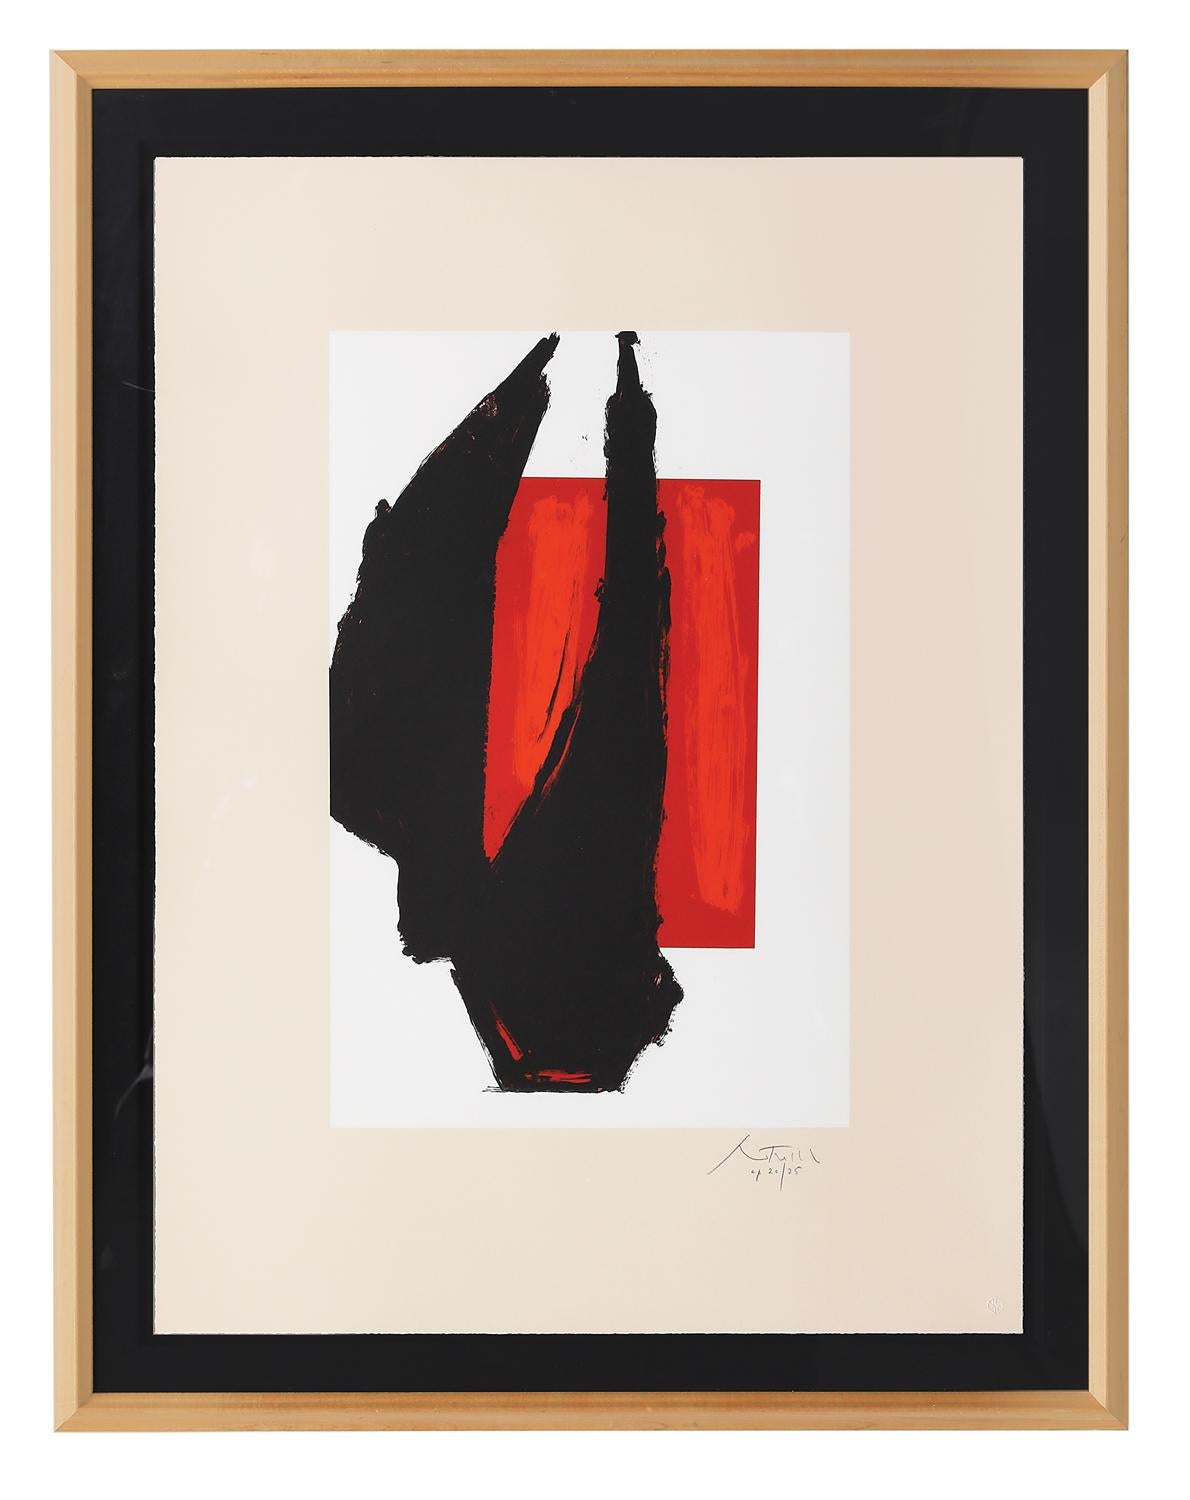 (after) Robert Motherwell Abstract Print - Superb Robert Motherwell Lithograph (Signed and Numbered)